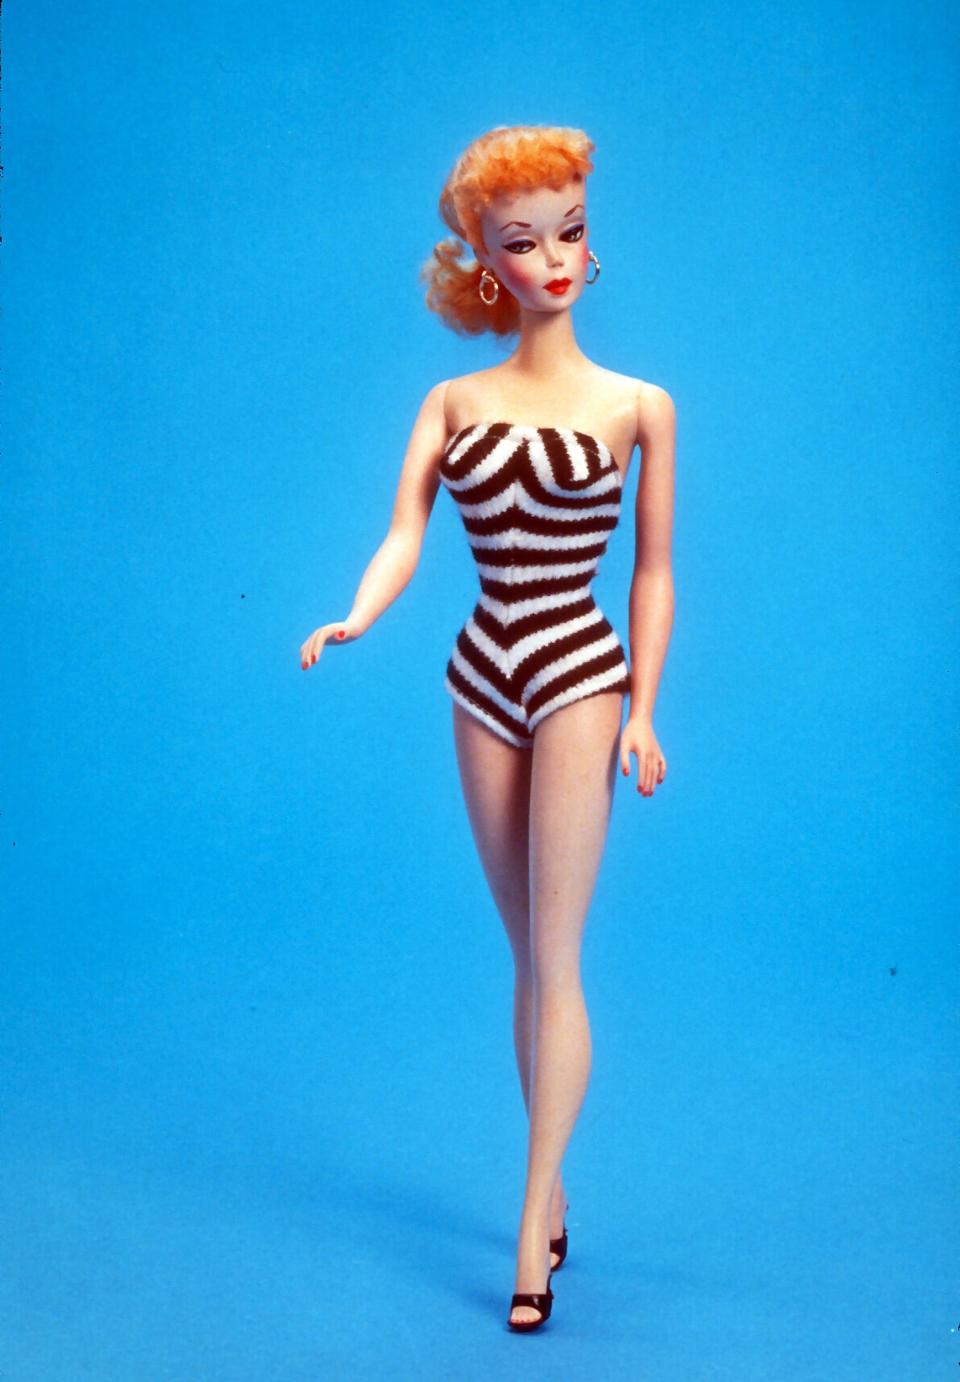 The original Barbie was launched in 1959.